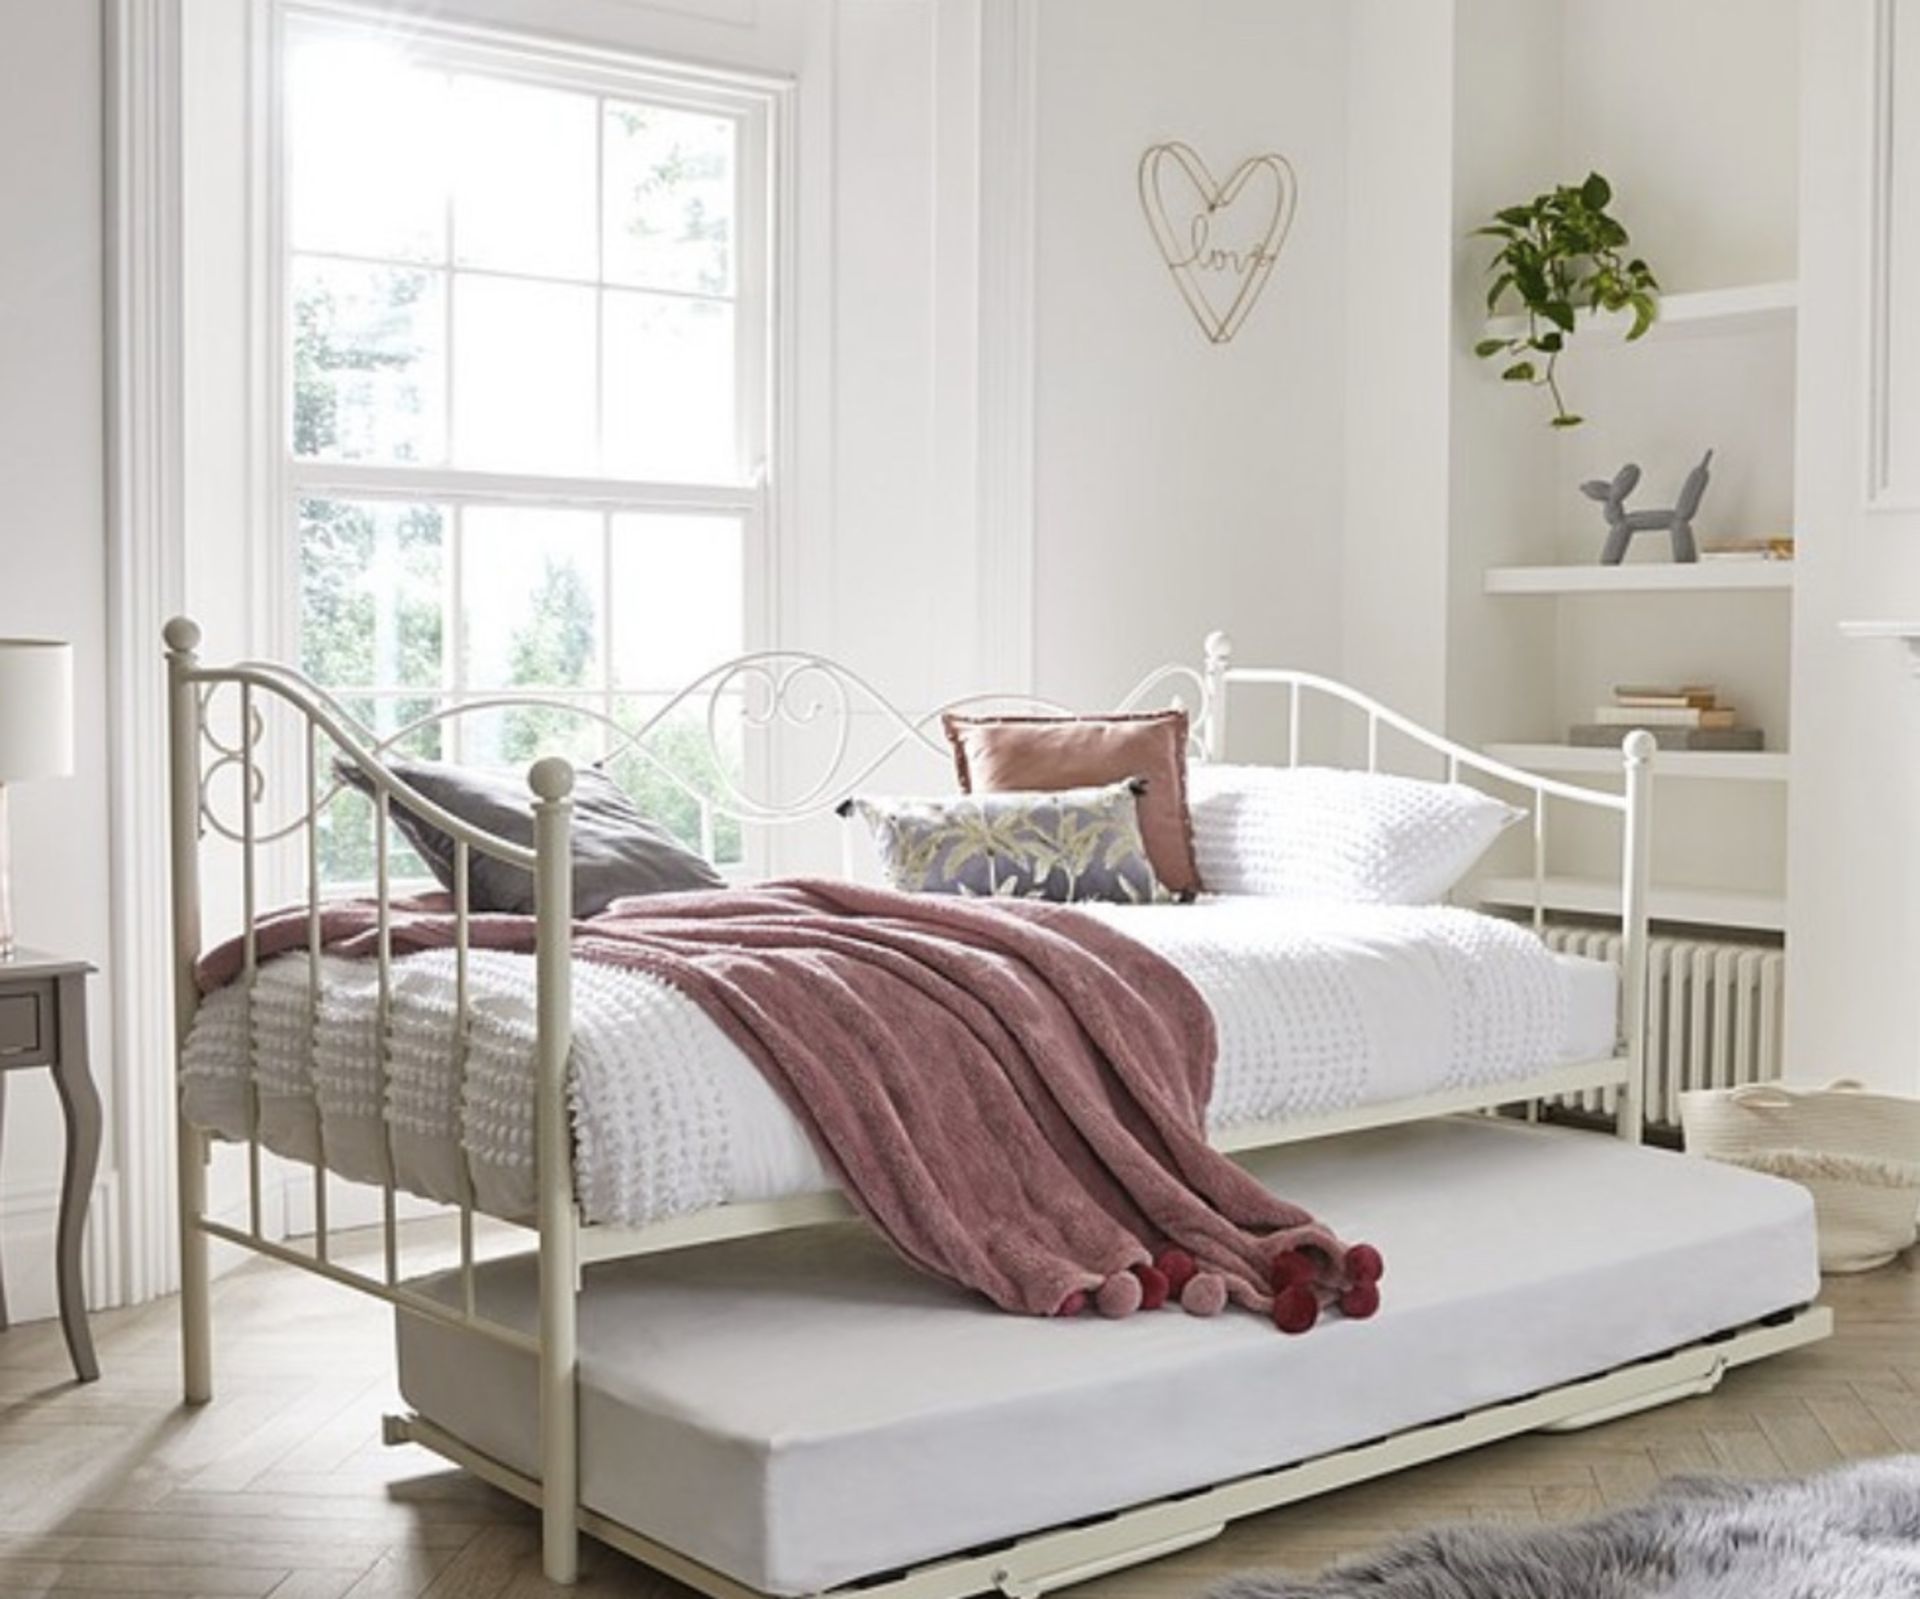 JULIETTE METAL DAY BED AND TRUNDLE BED IN IVORY - RRP £310